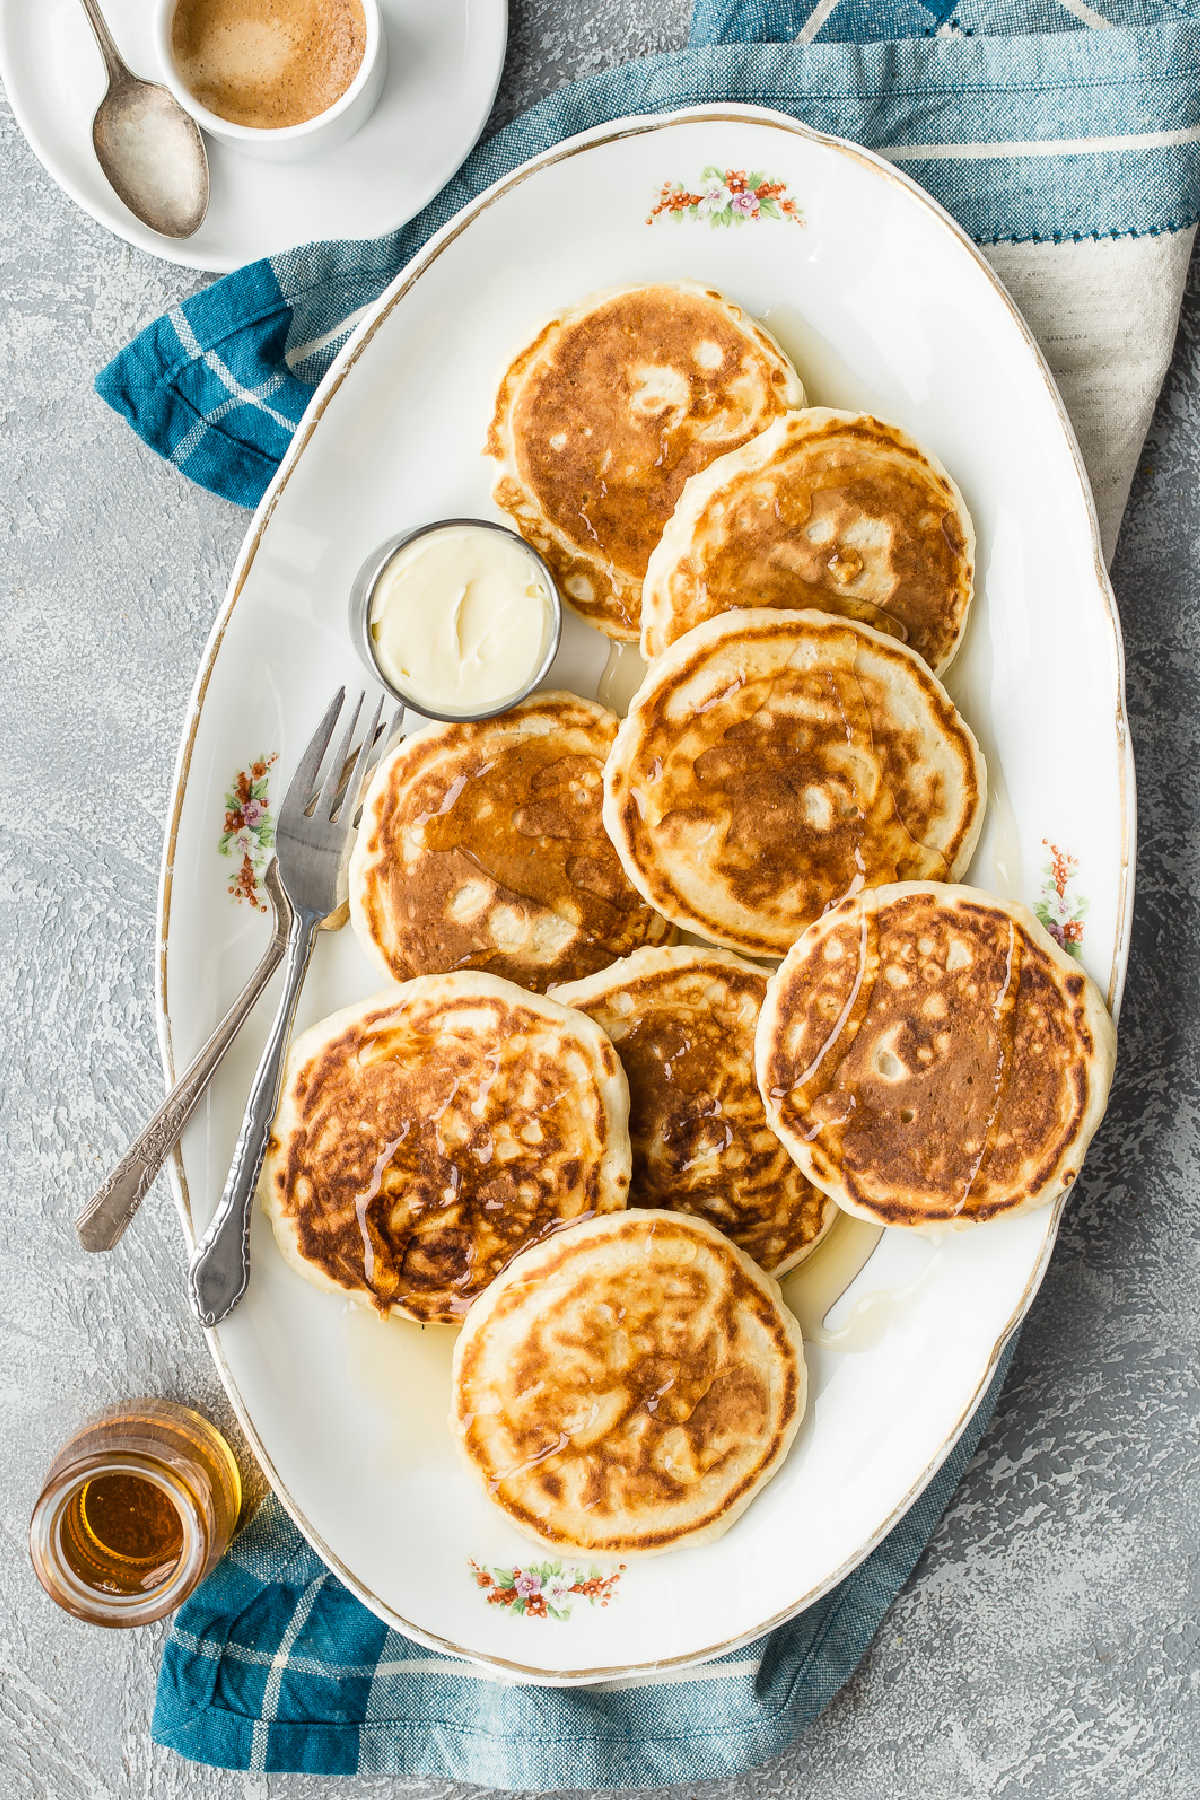 A platter of vegan pancakes with maple syrup on top.